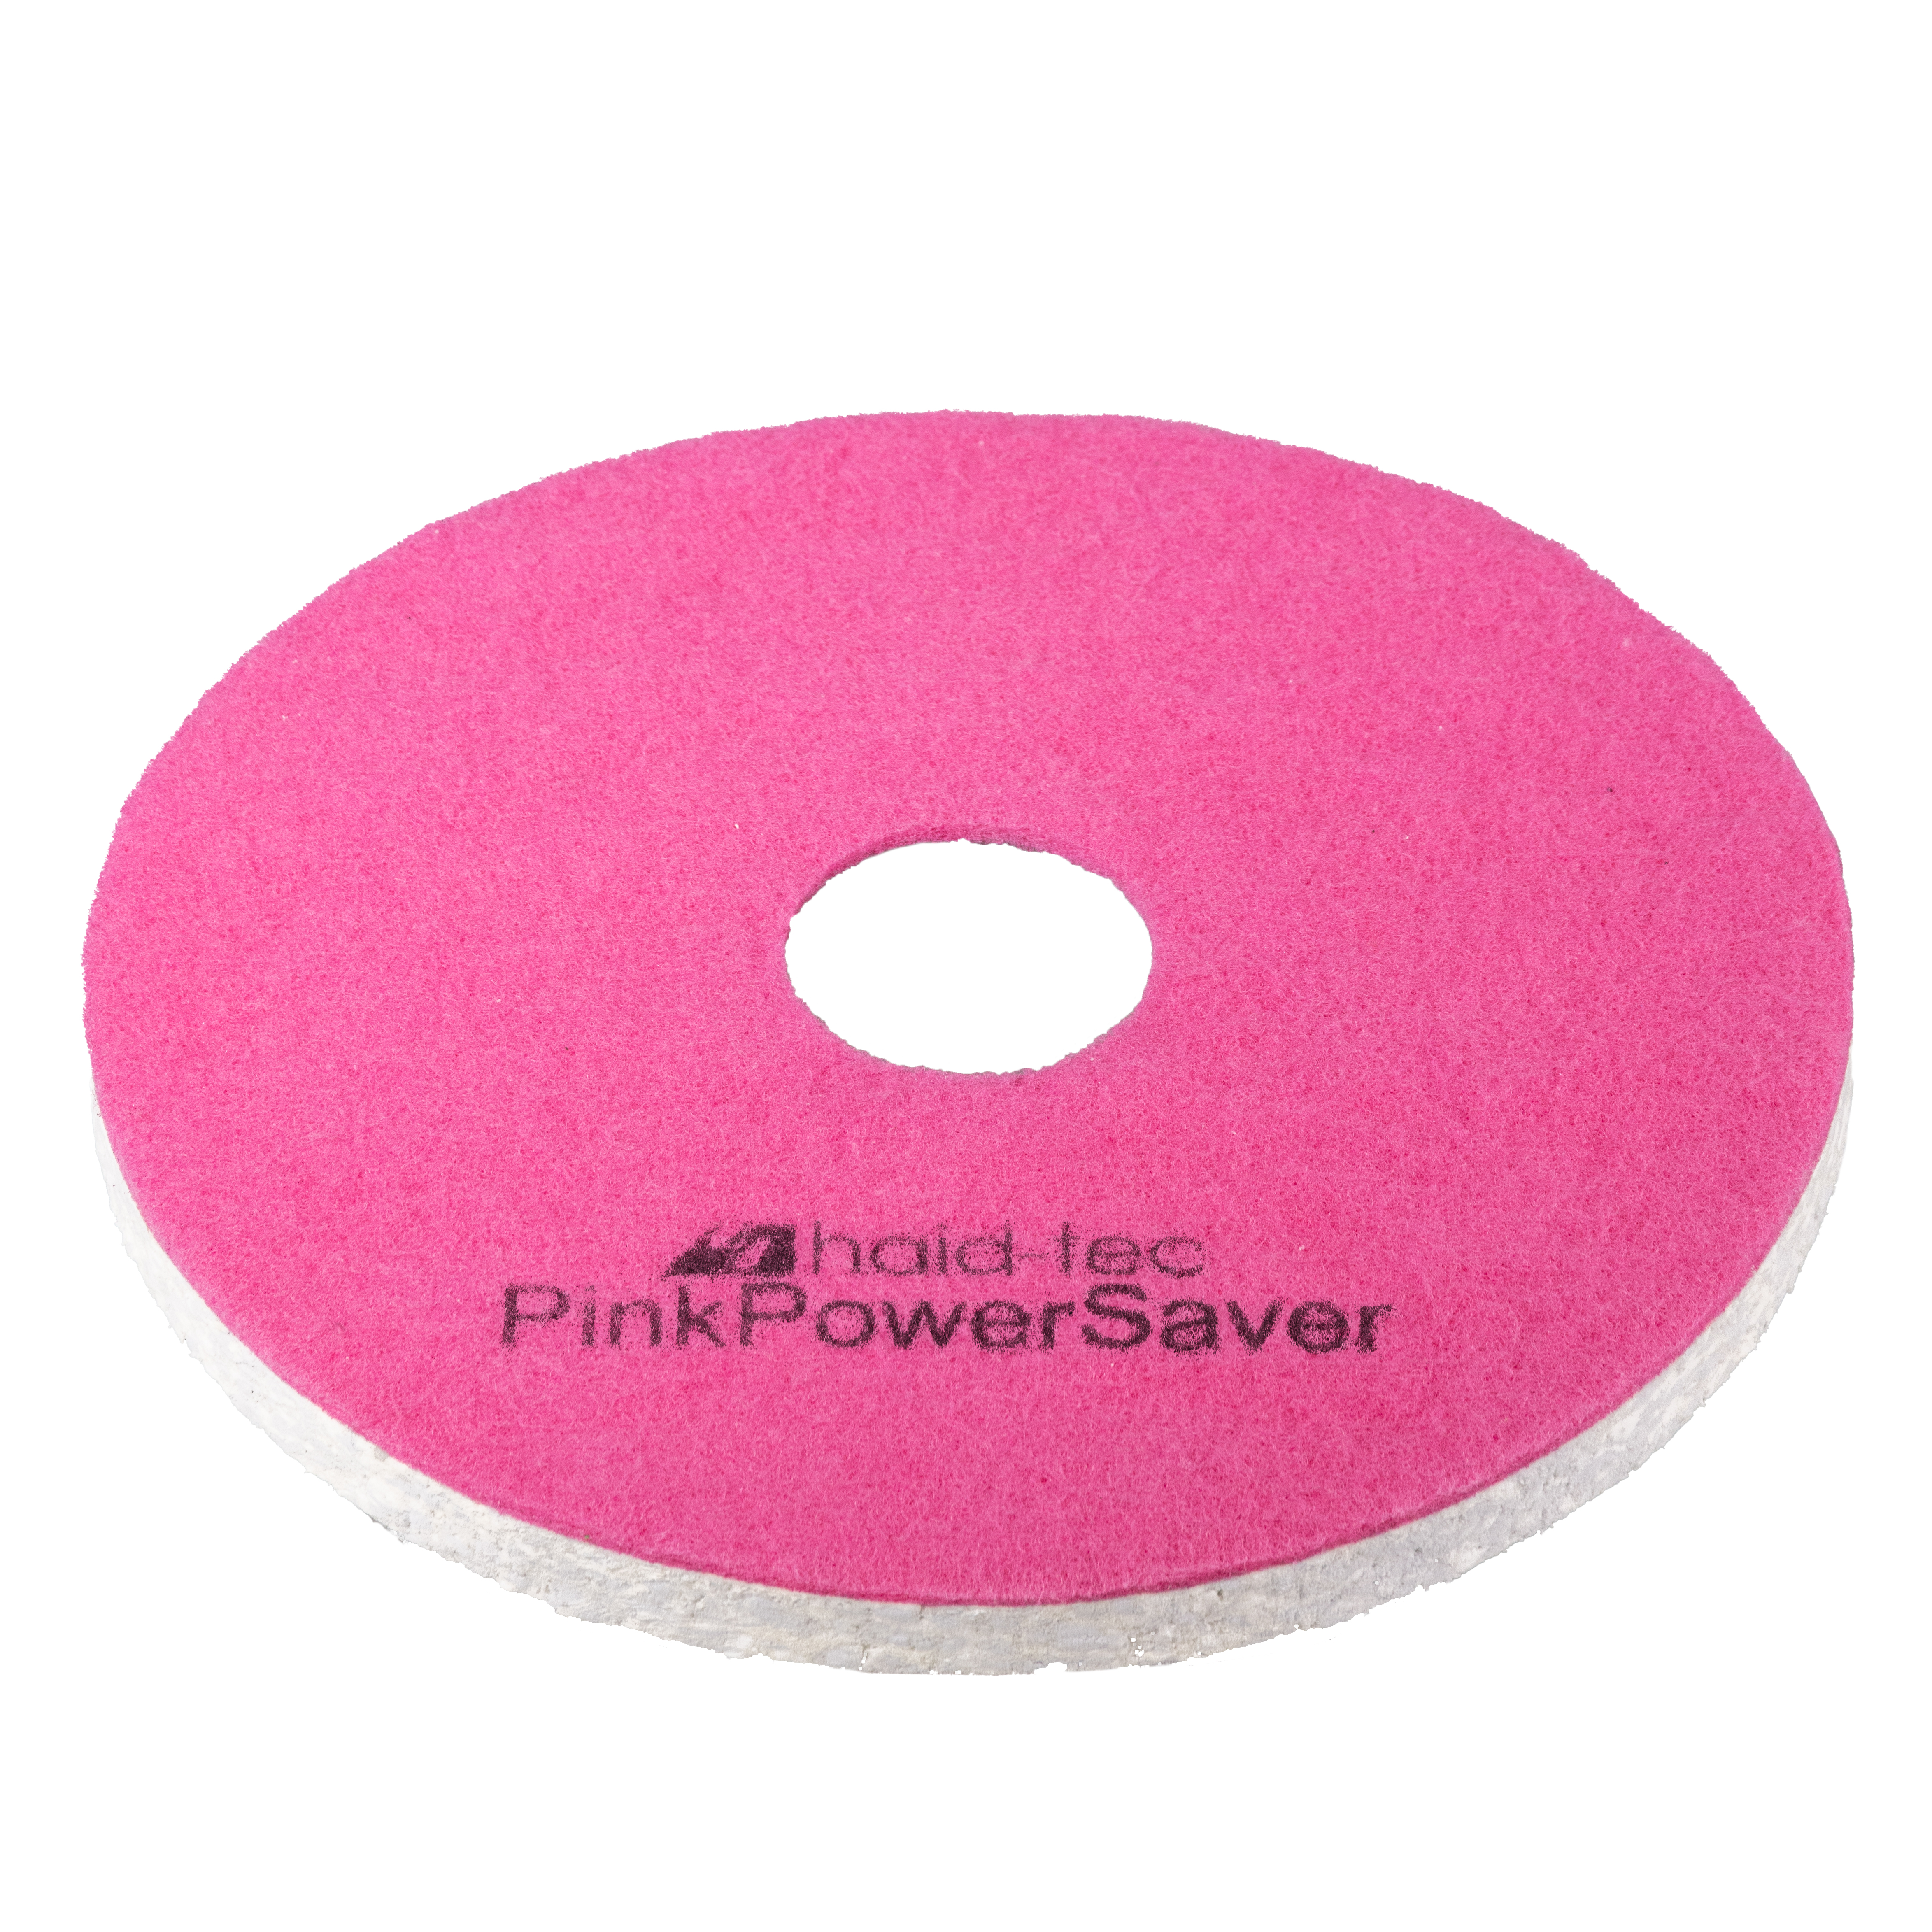 PinkPowerSaver Pad 8.6inch/218mm for NUC244NX, pad for compact scrubber dryer - melamine pad for intensive and maintenance cleaning